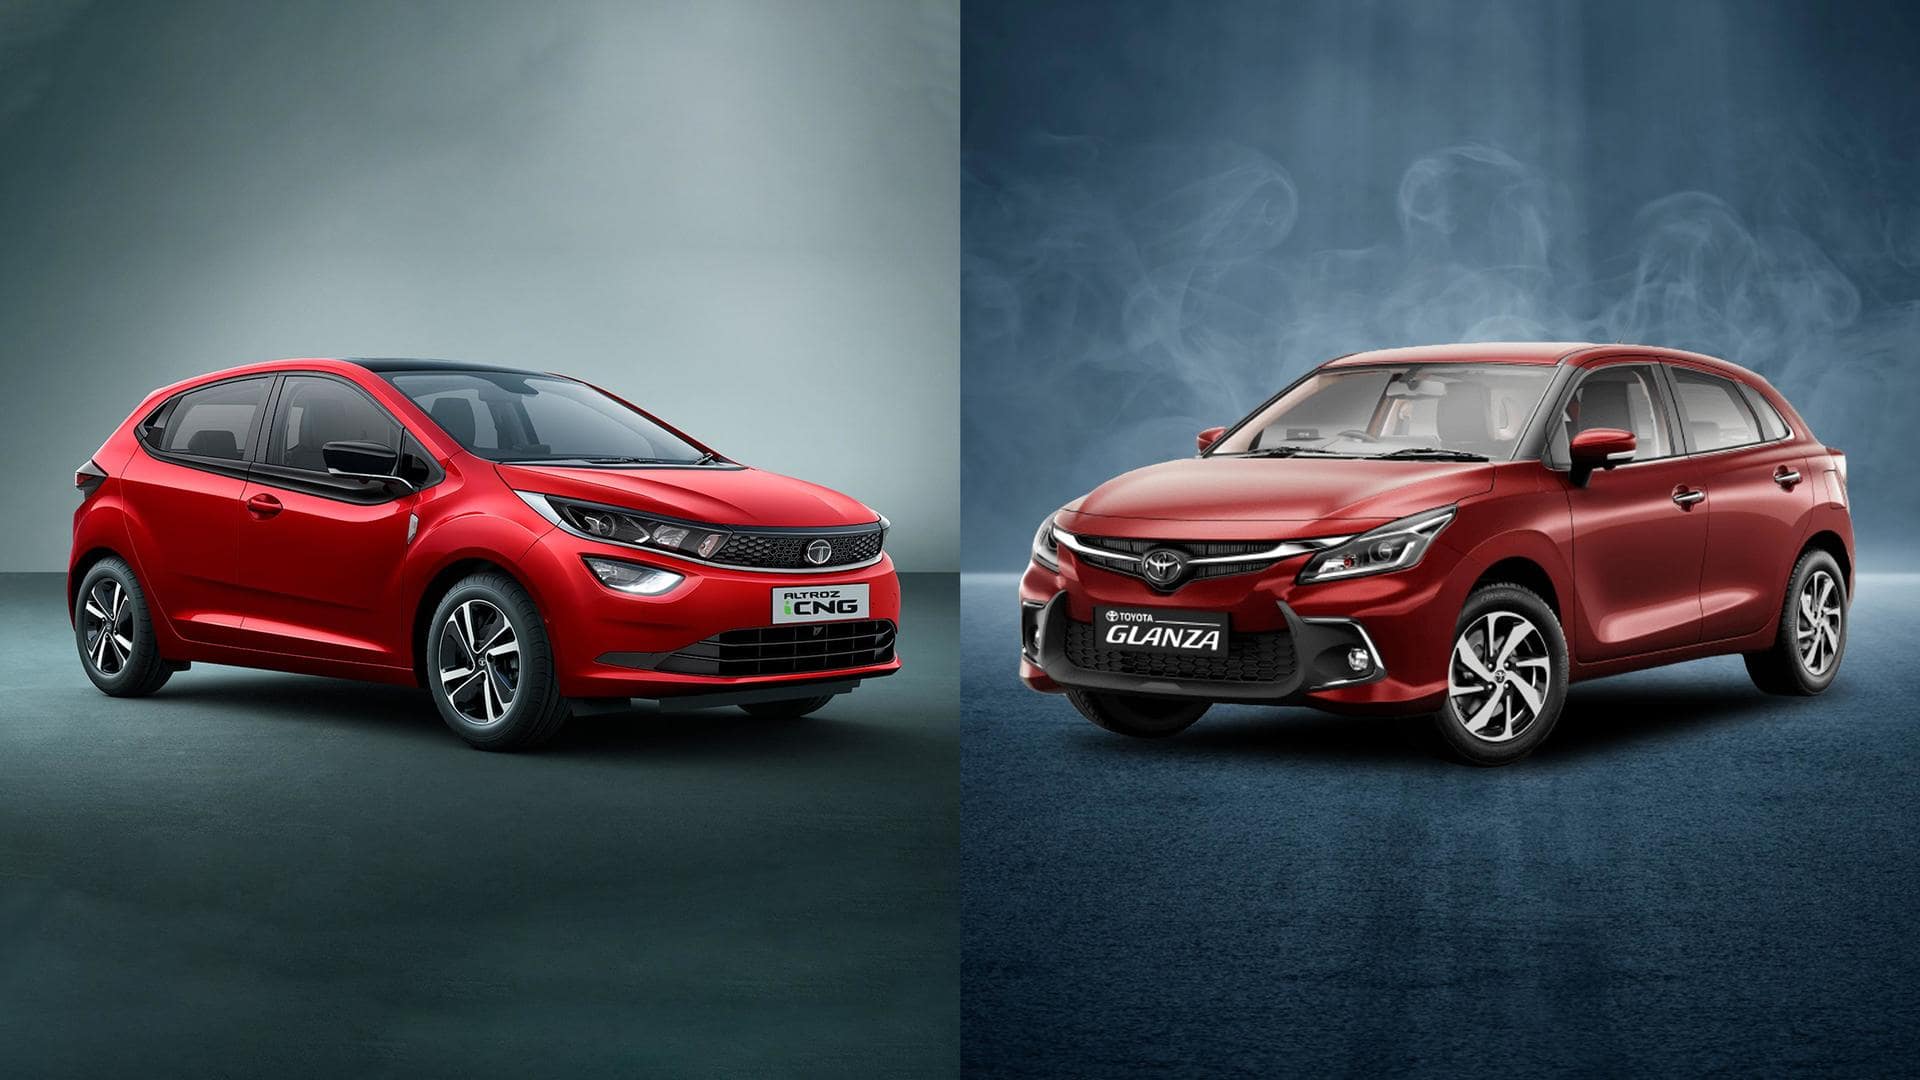 Tata Altroz iCNG v/s Toyota Glanza CNG: Which is better